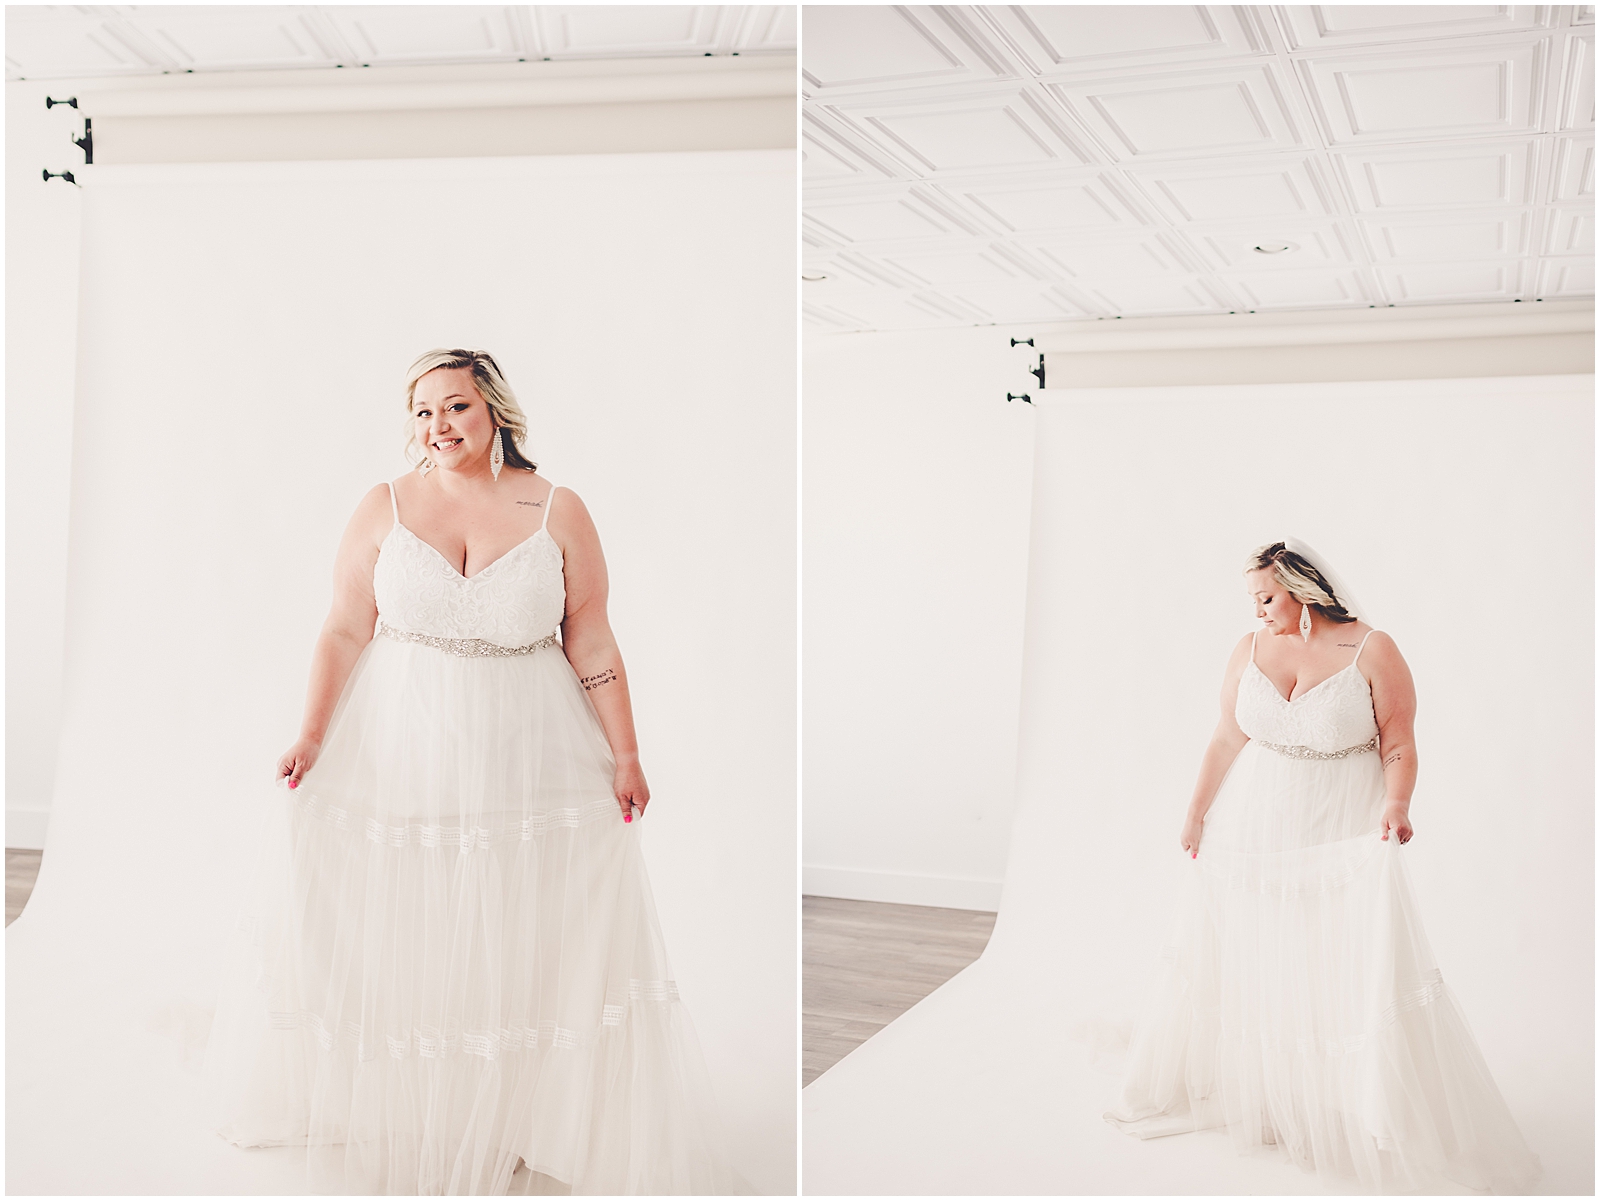 Amy's studio bridal session at natural light photography studio - Studio 388 - in downtown Kankakee, Illinois.